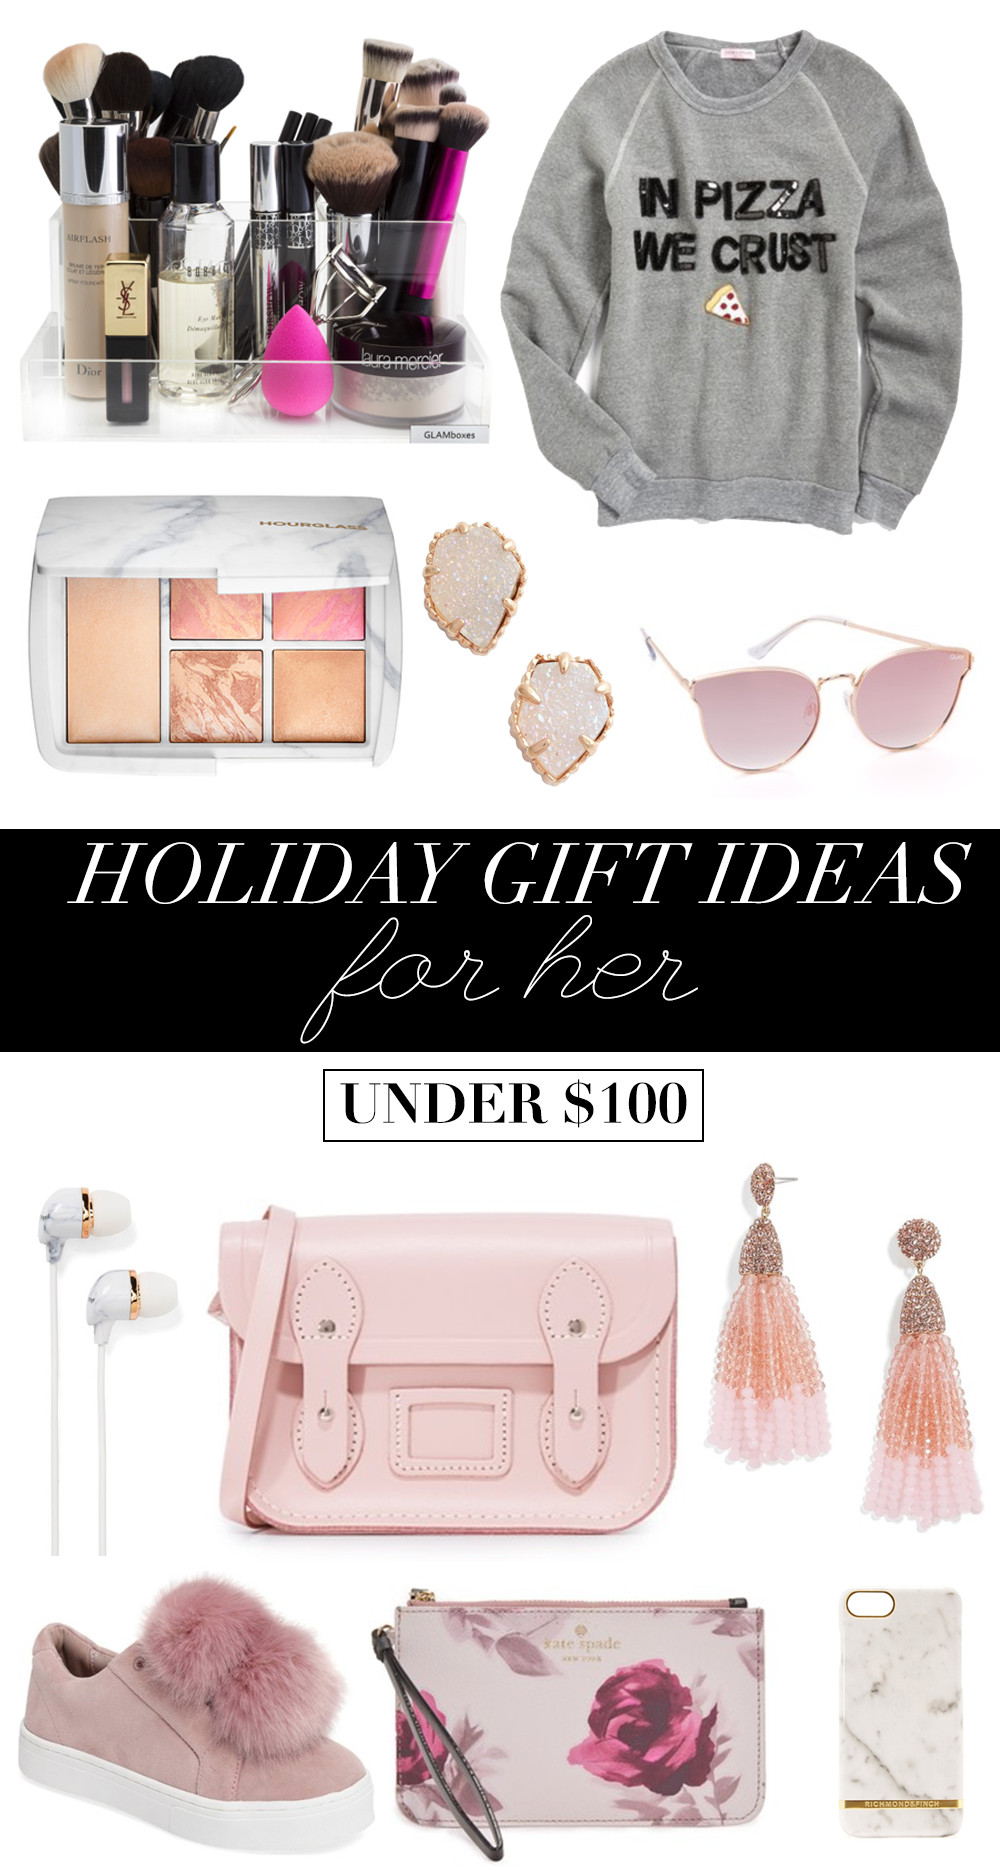 Holiday Gift Ideas For Her
 Holiday Gift Ideas For Her Under $100